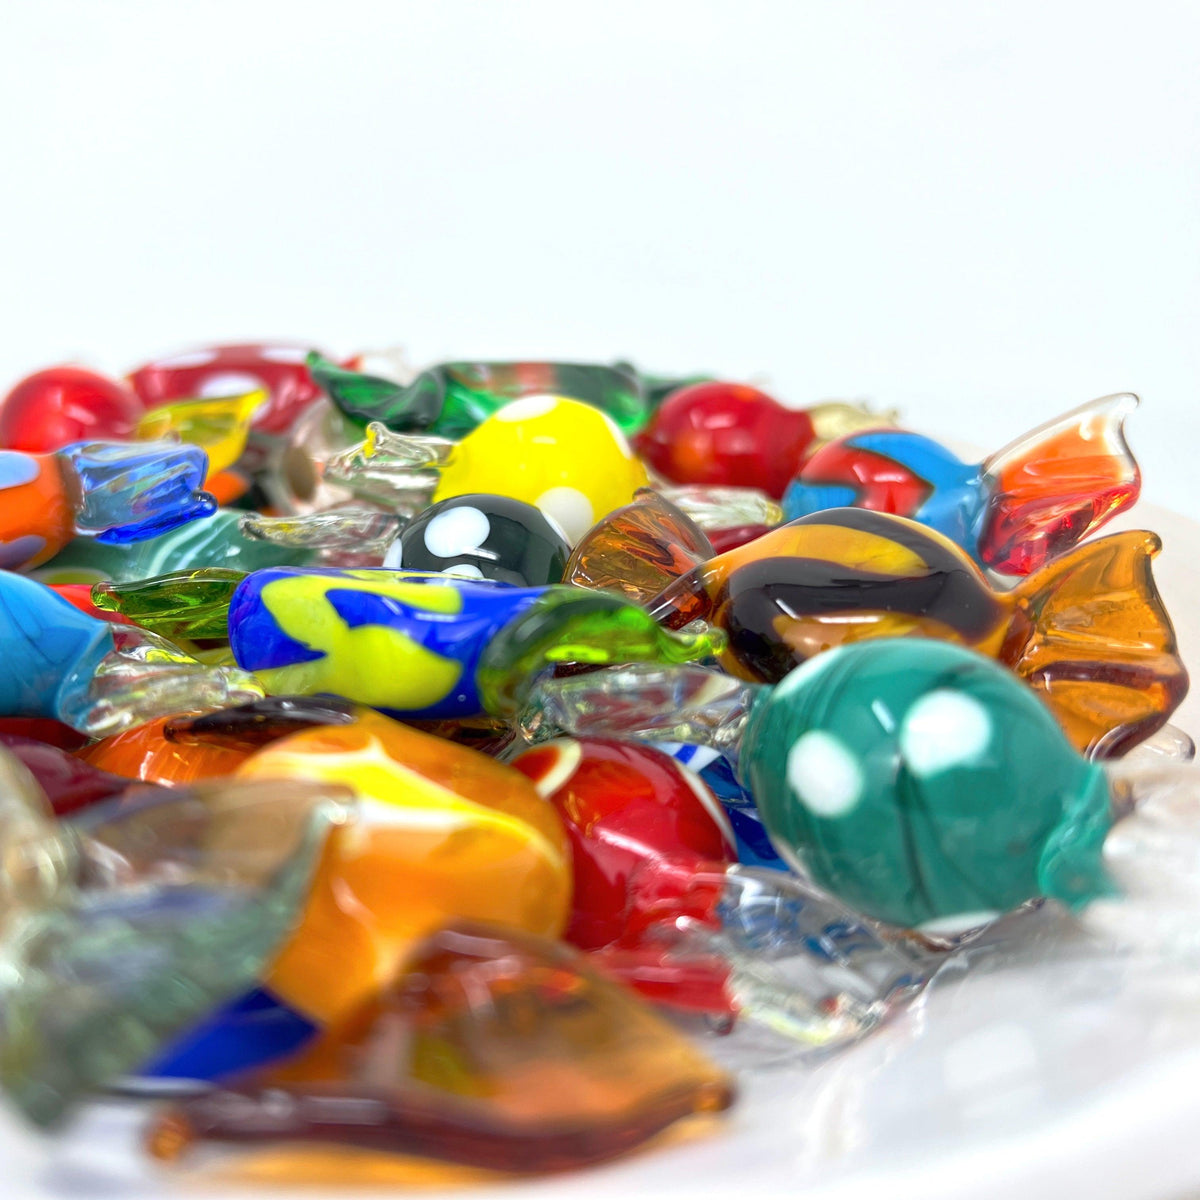 Murano Glass Candy, Retro, Set of 3, 5, or 10 Candies, Decorative Glass Sweets at MyItalianDecor